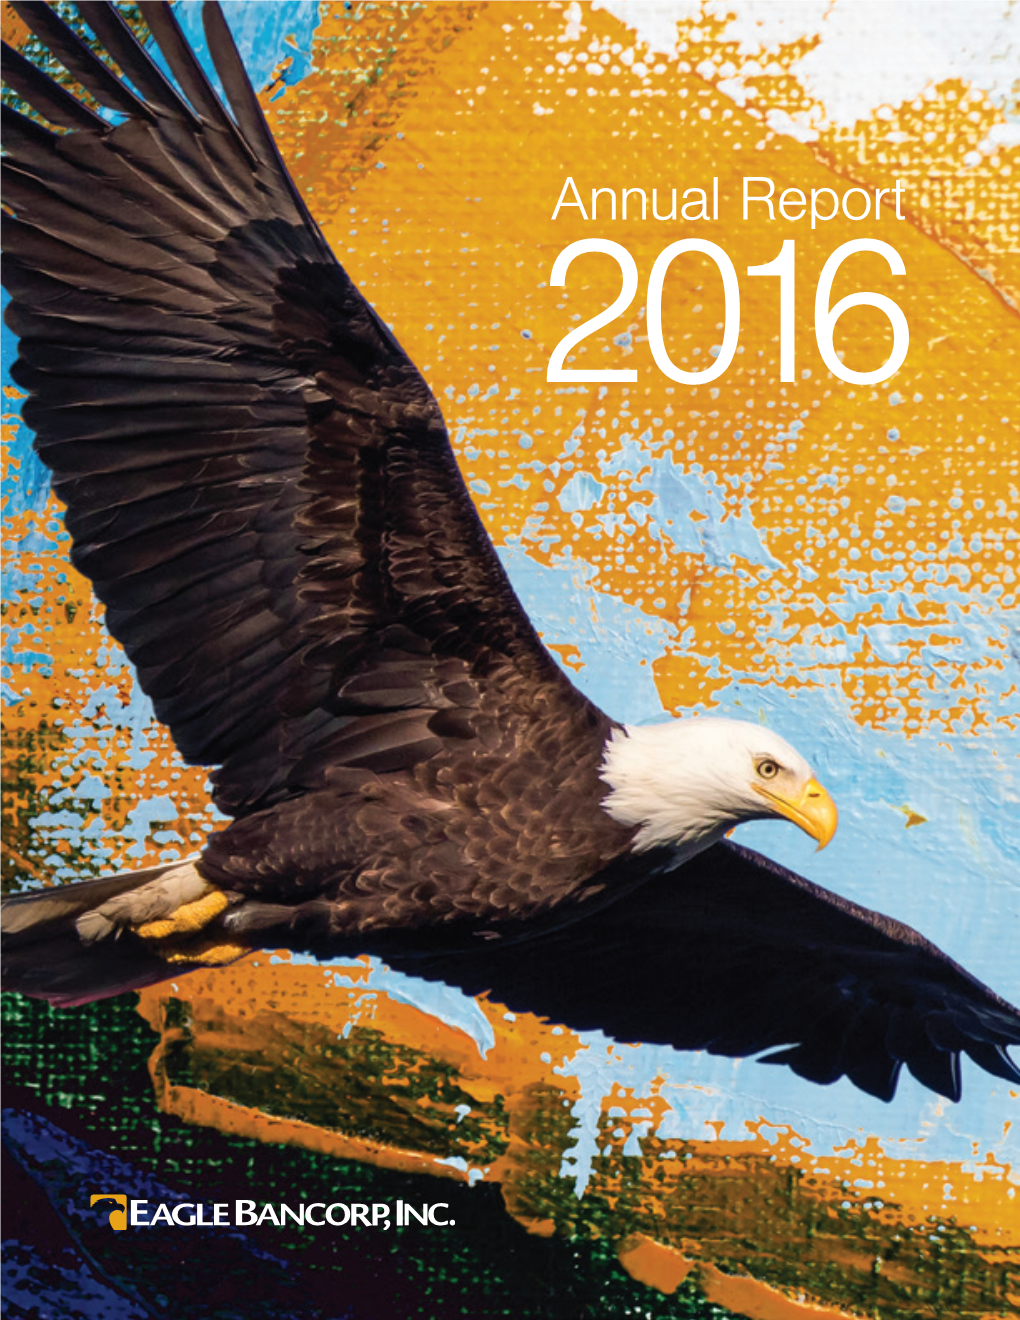 Annual Report 2016 to Our Shareholders